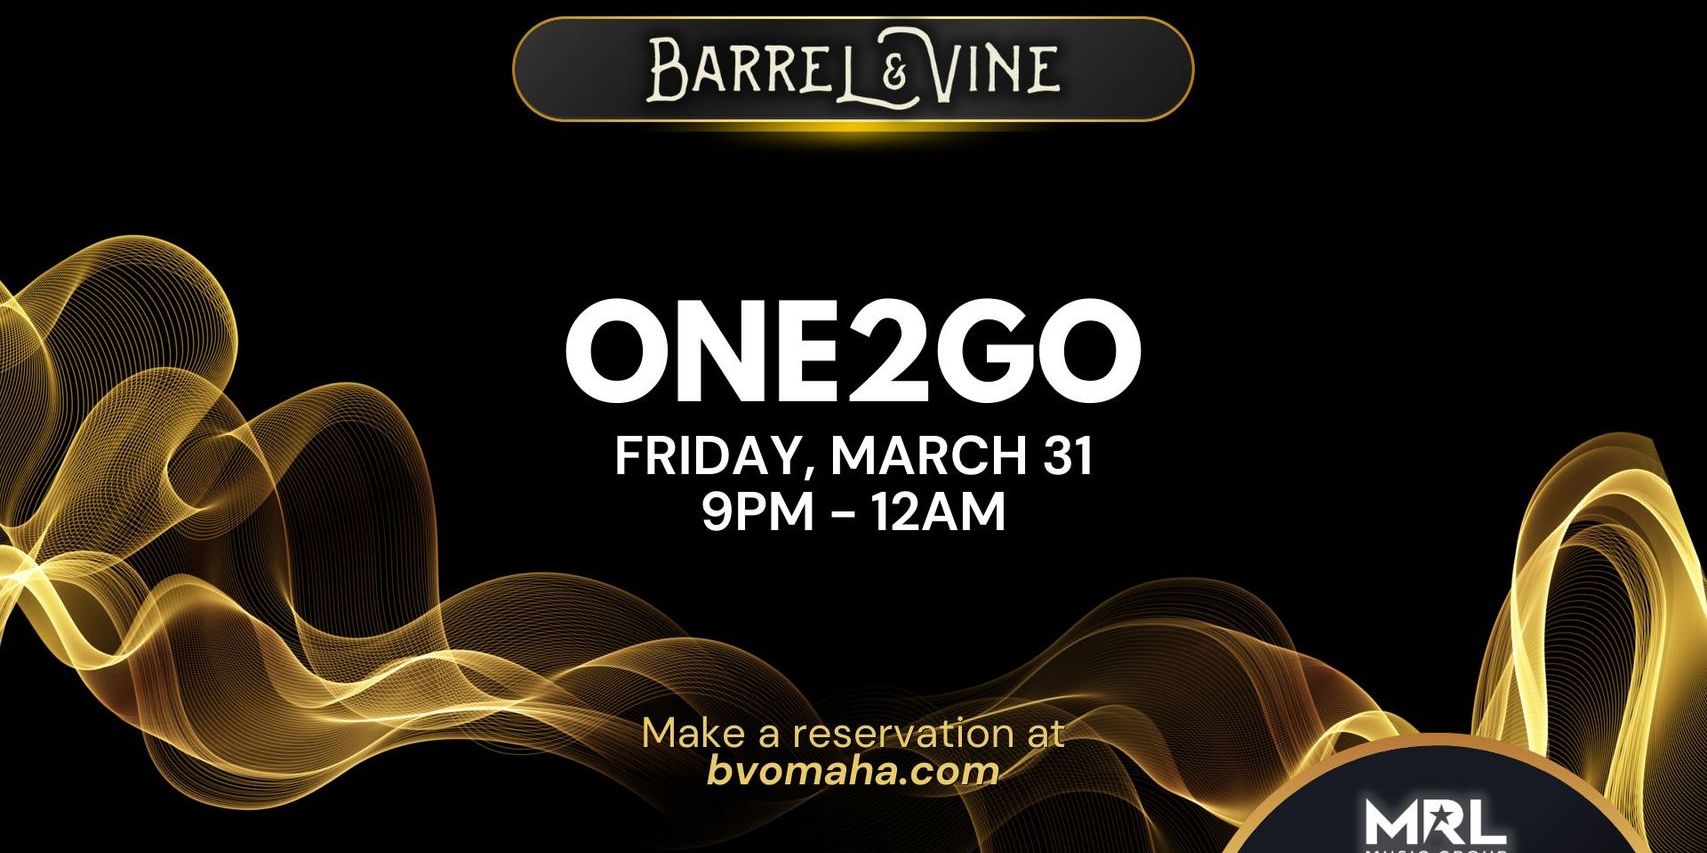 One2Go | Friday, March 31 | Live Music at Barrel & Vine promotional image